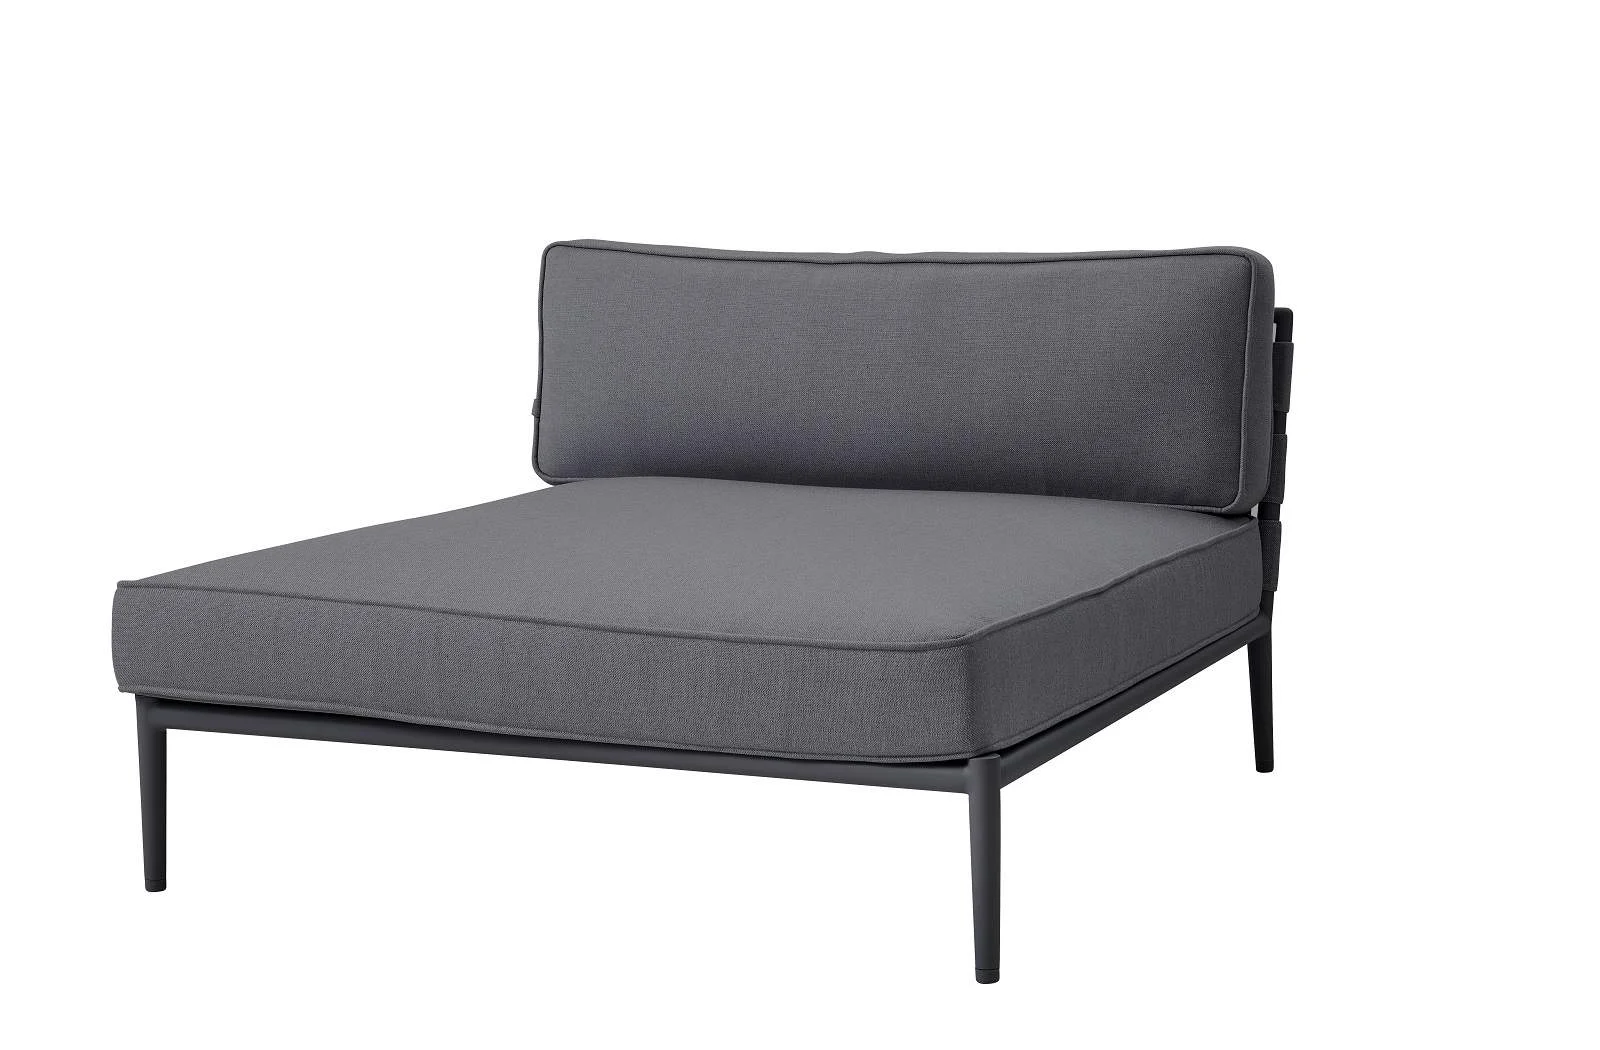 Cane-line Conic | Daybed Modul AirTouch | Grey